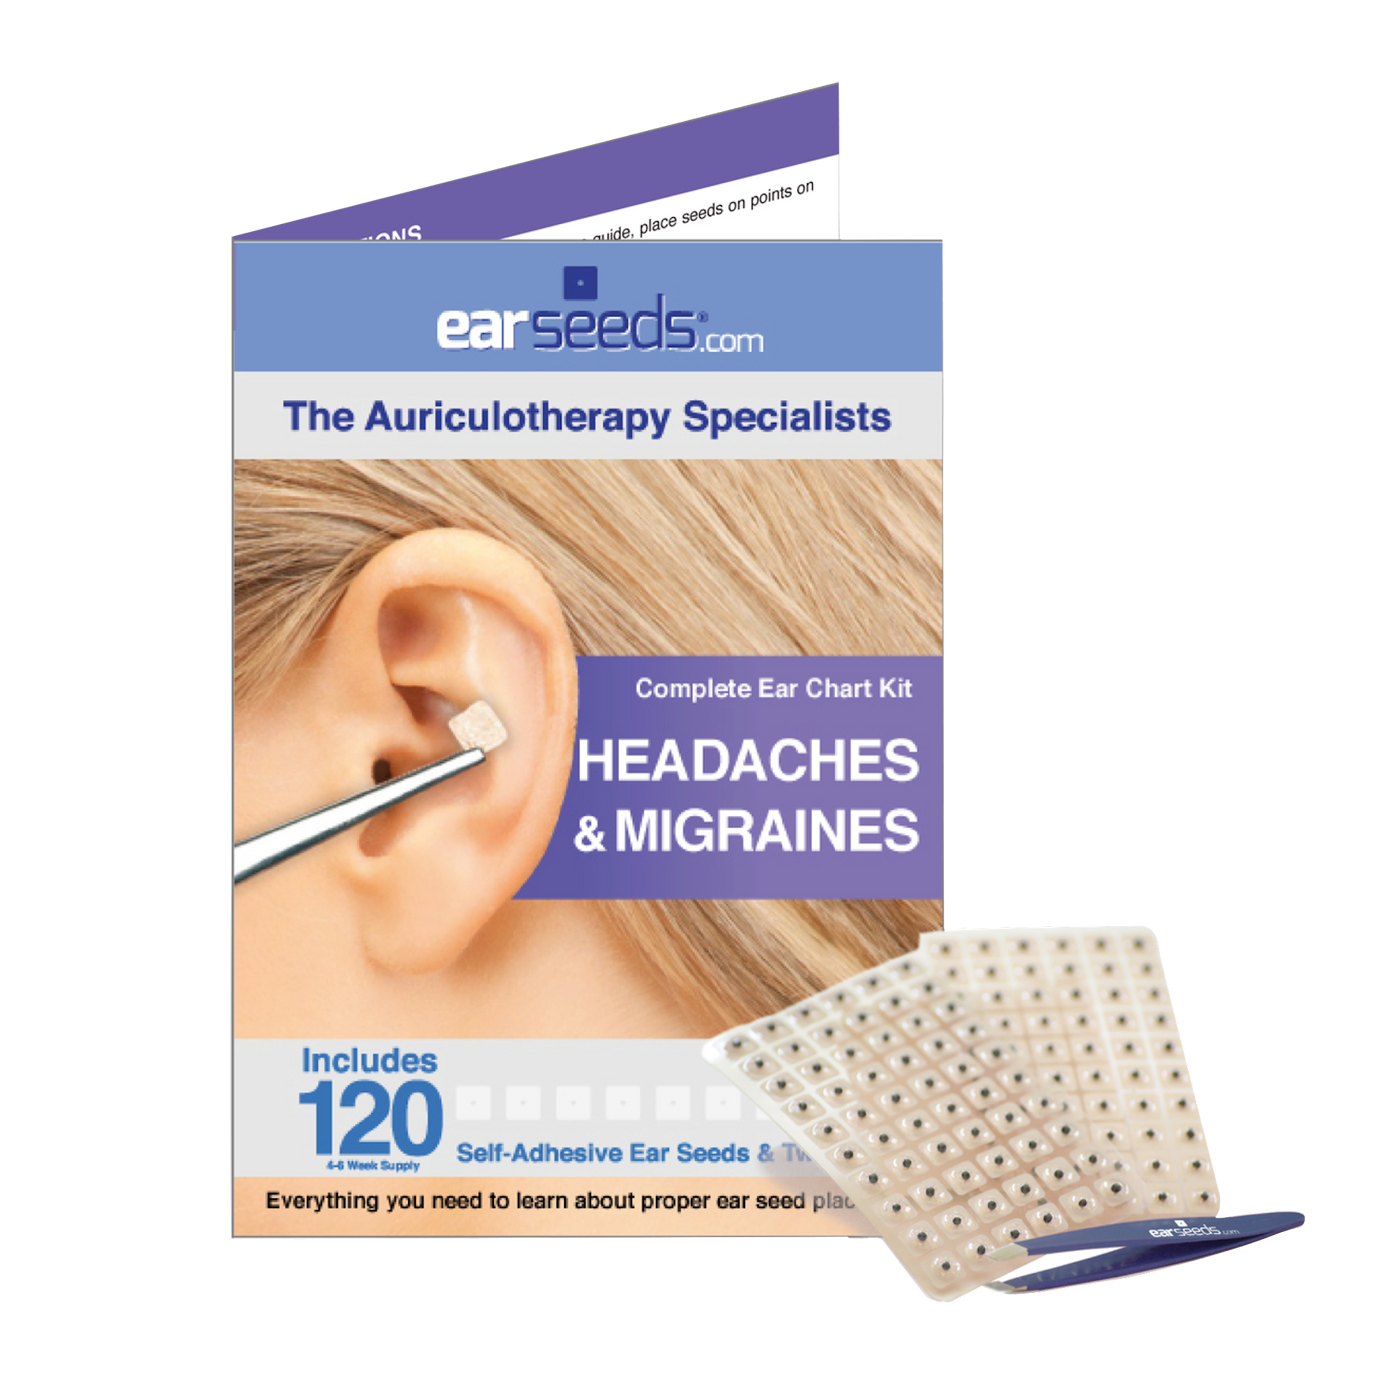 Headaches / Migraines Ear Seed 1 Kit Curated Wellness